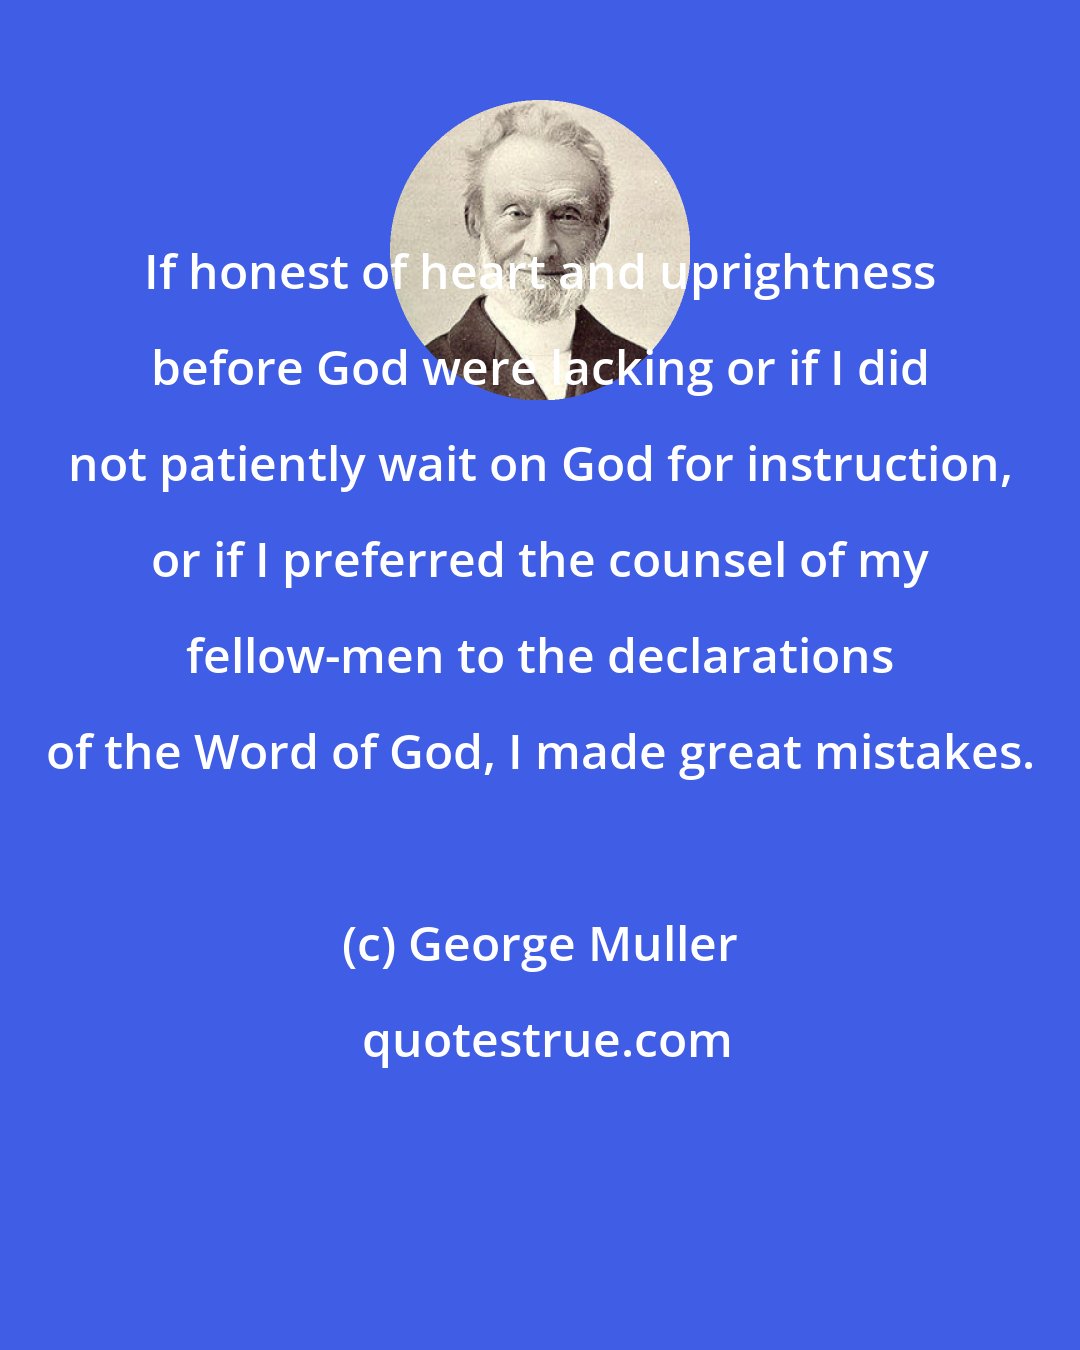 George Muller: If honest of heart and uprightness before God were lacking or if I did not patiently wait on God for instruction, or if I preferred the counsel of my fellow-men to the declarations of the Word of God, I made great mistakes.